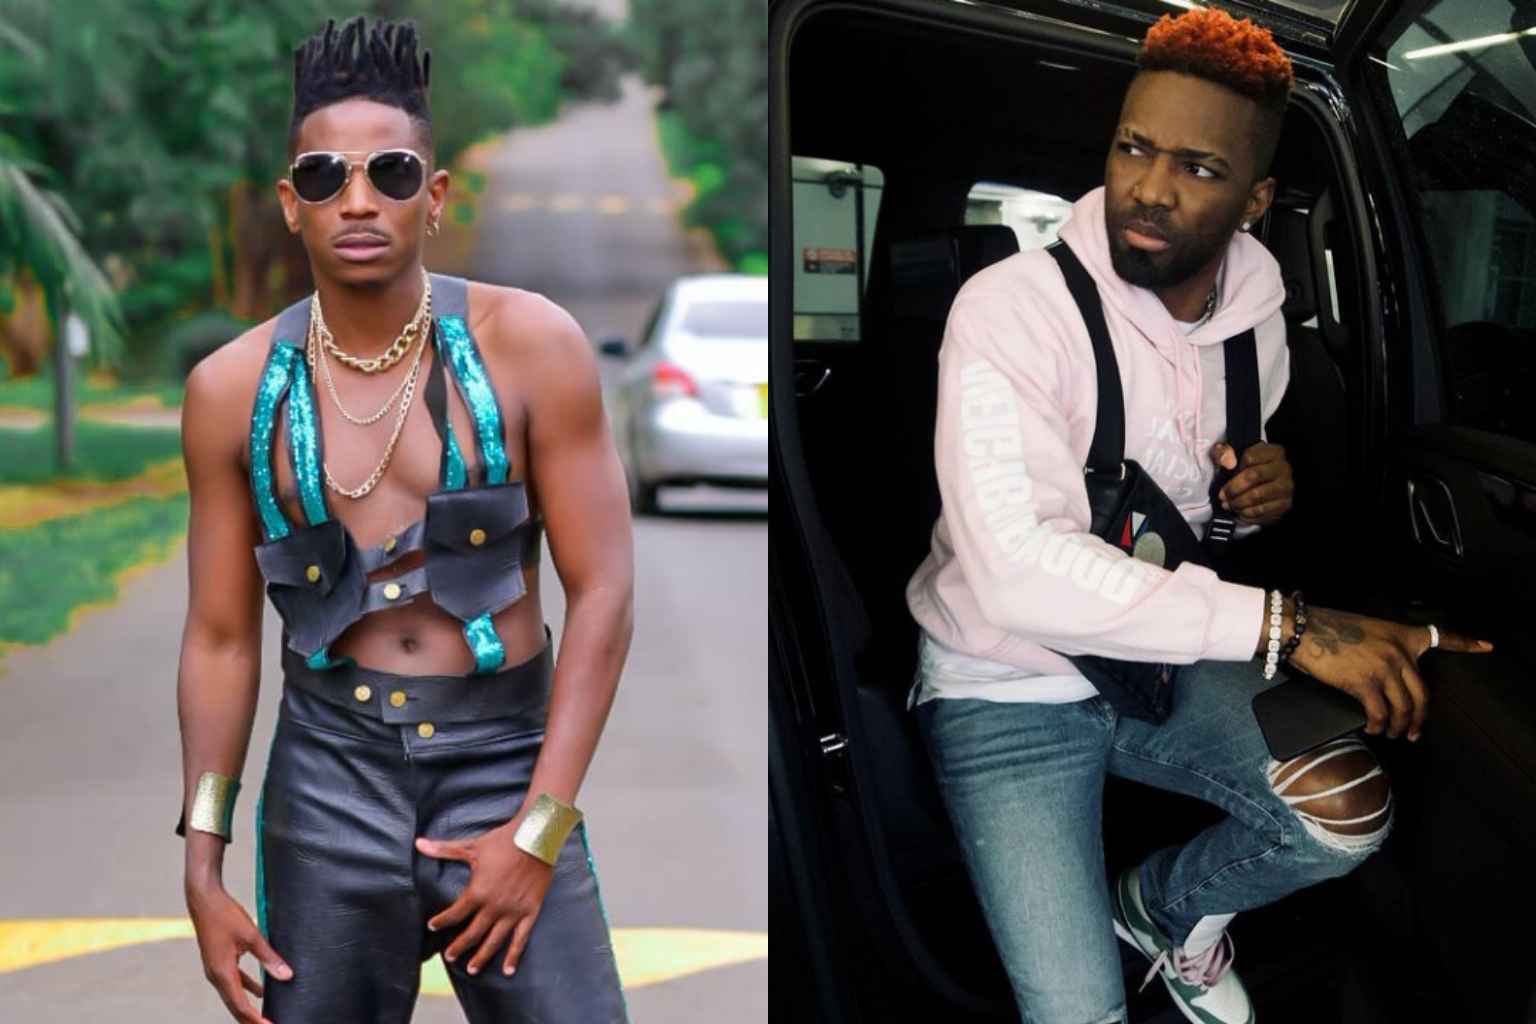 What Makes You So Salty? Eric Omondi's Career is Jeopardized by Konshens' Tackle